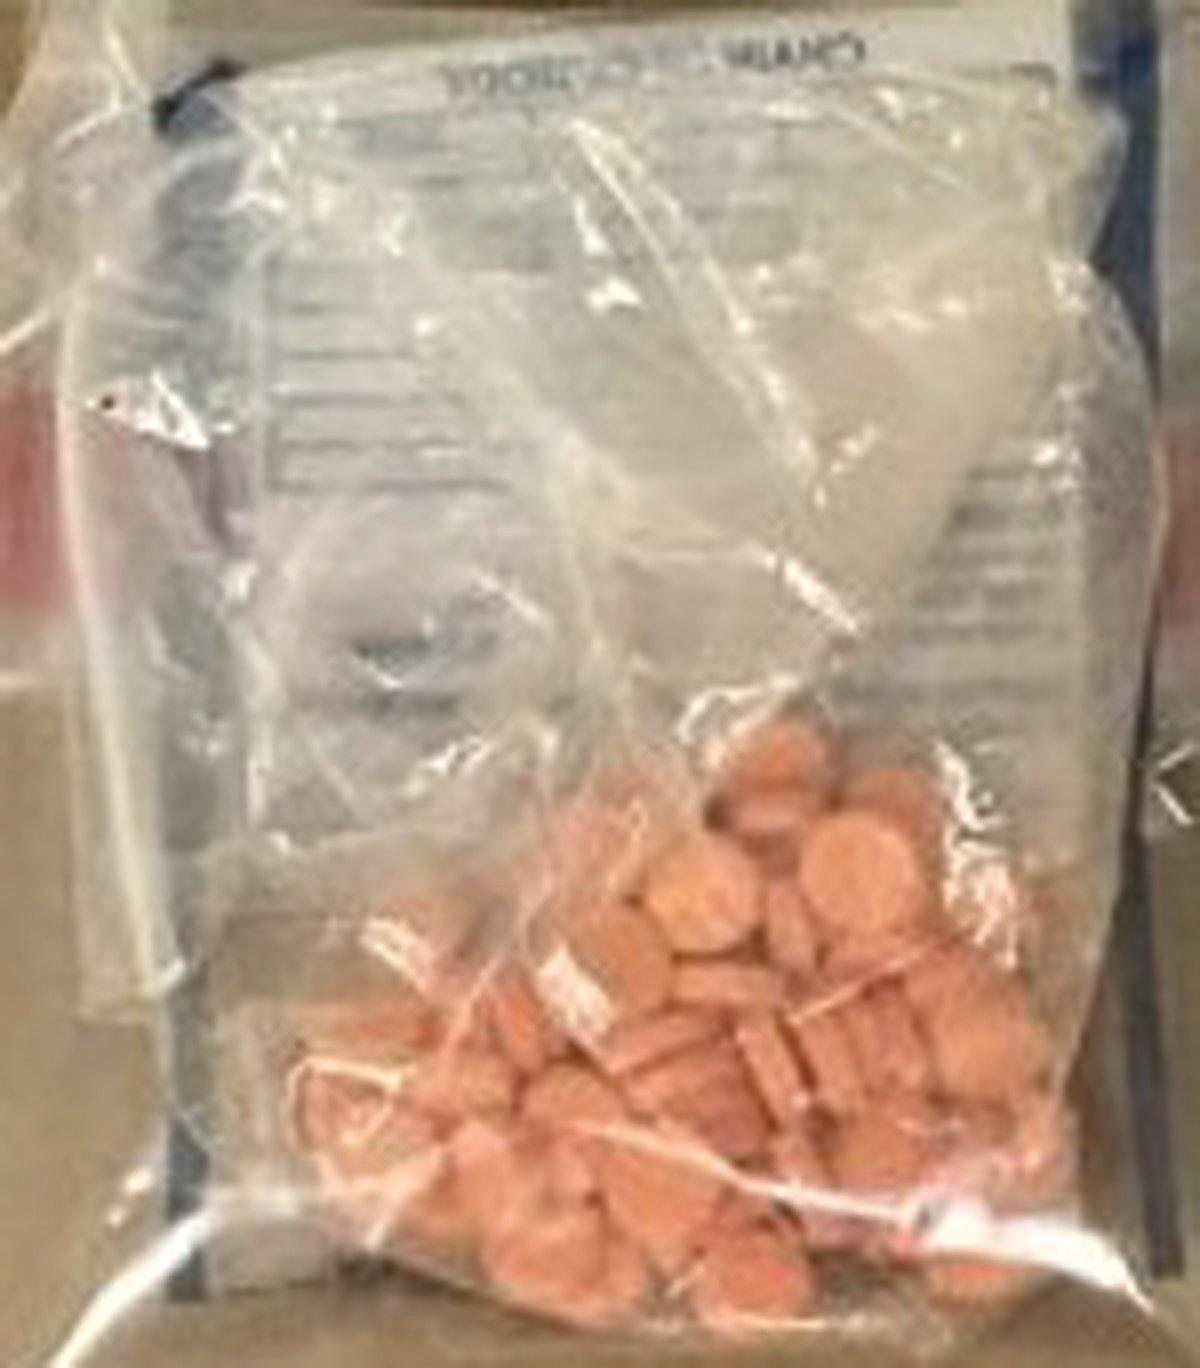 Cranston police said a search of the vehicle resulted in the seizure of 49 counterfeit pills stamped with the numerical identifier E-404, associated with an amphetamine commonly prescribed to treat ADHT and narcolepsy, but later, a field test revealed the pills contained fentanyl.